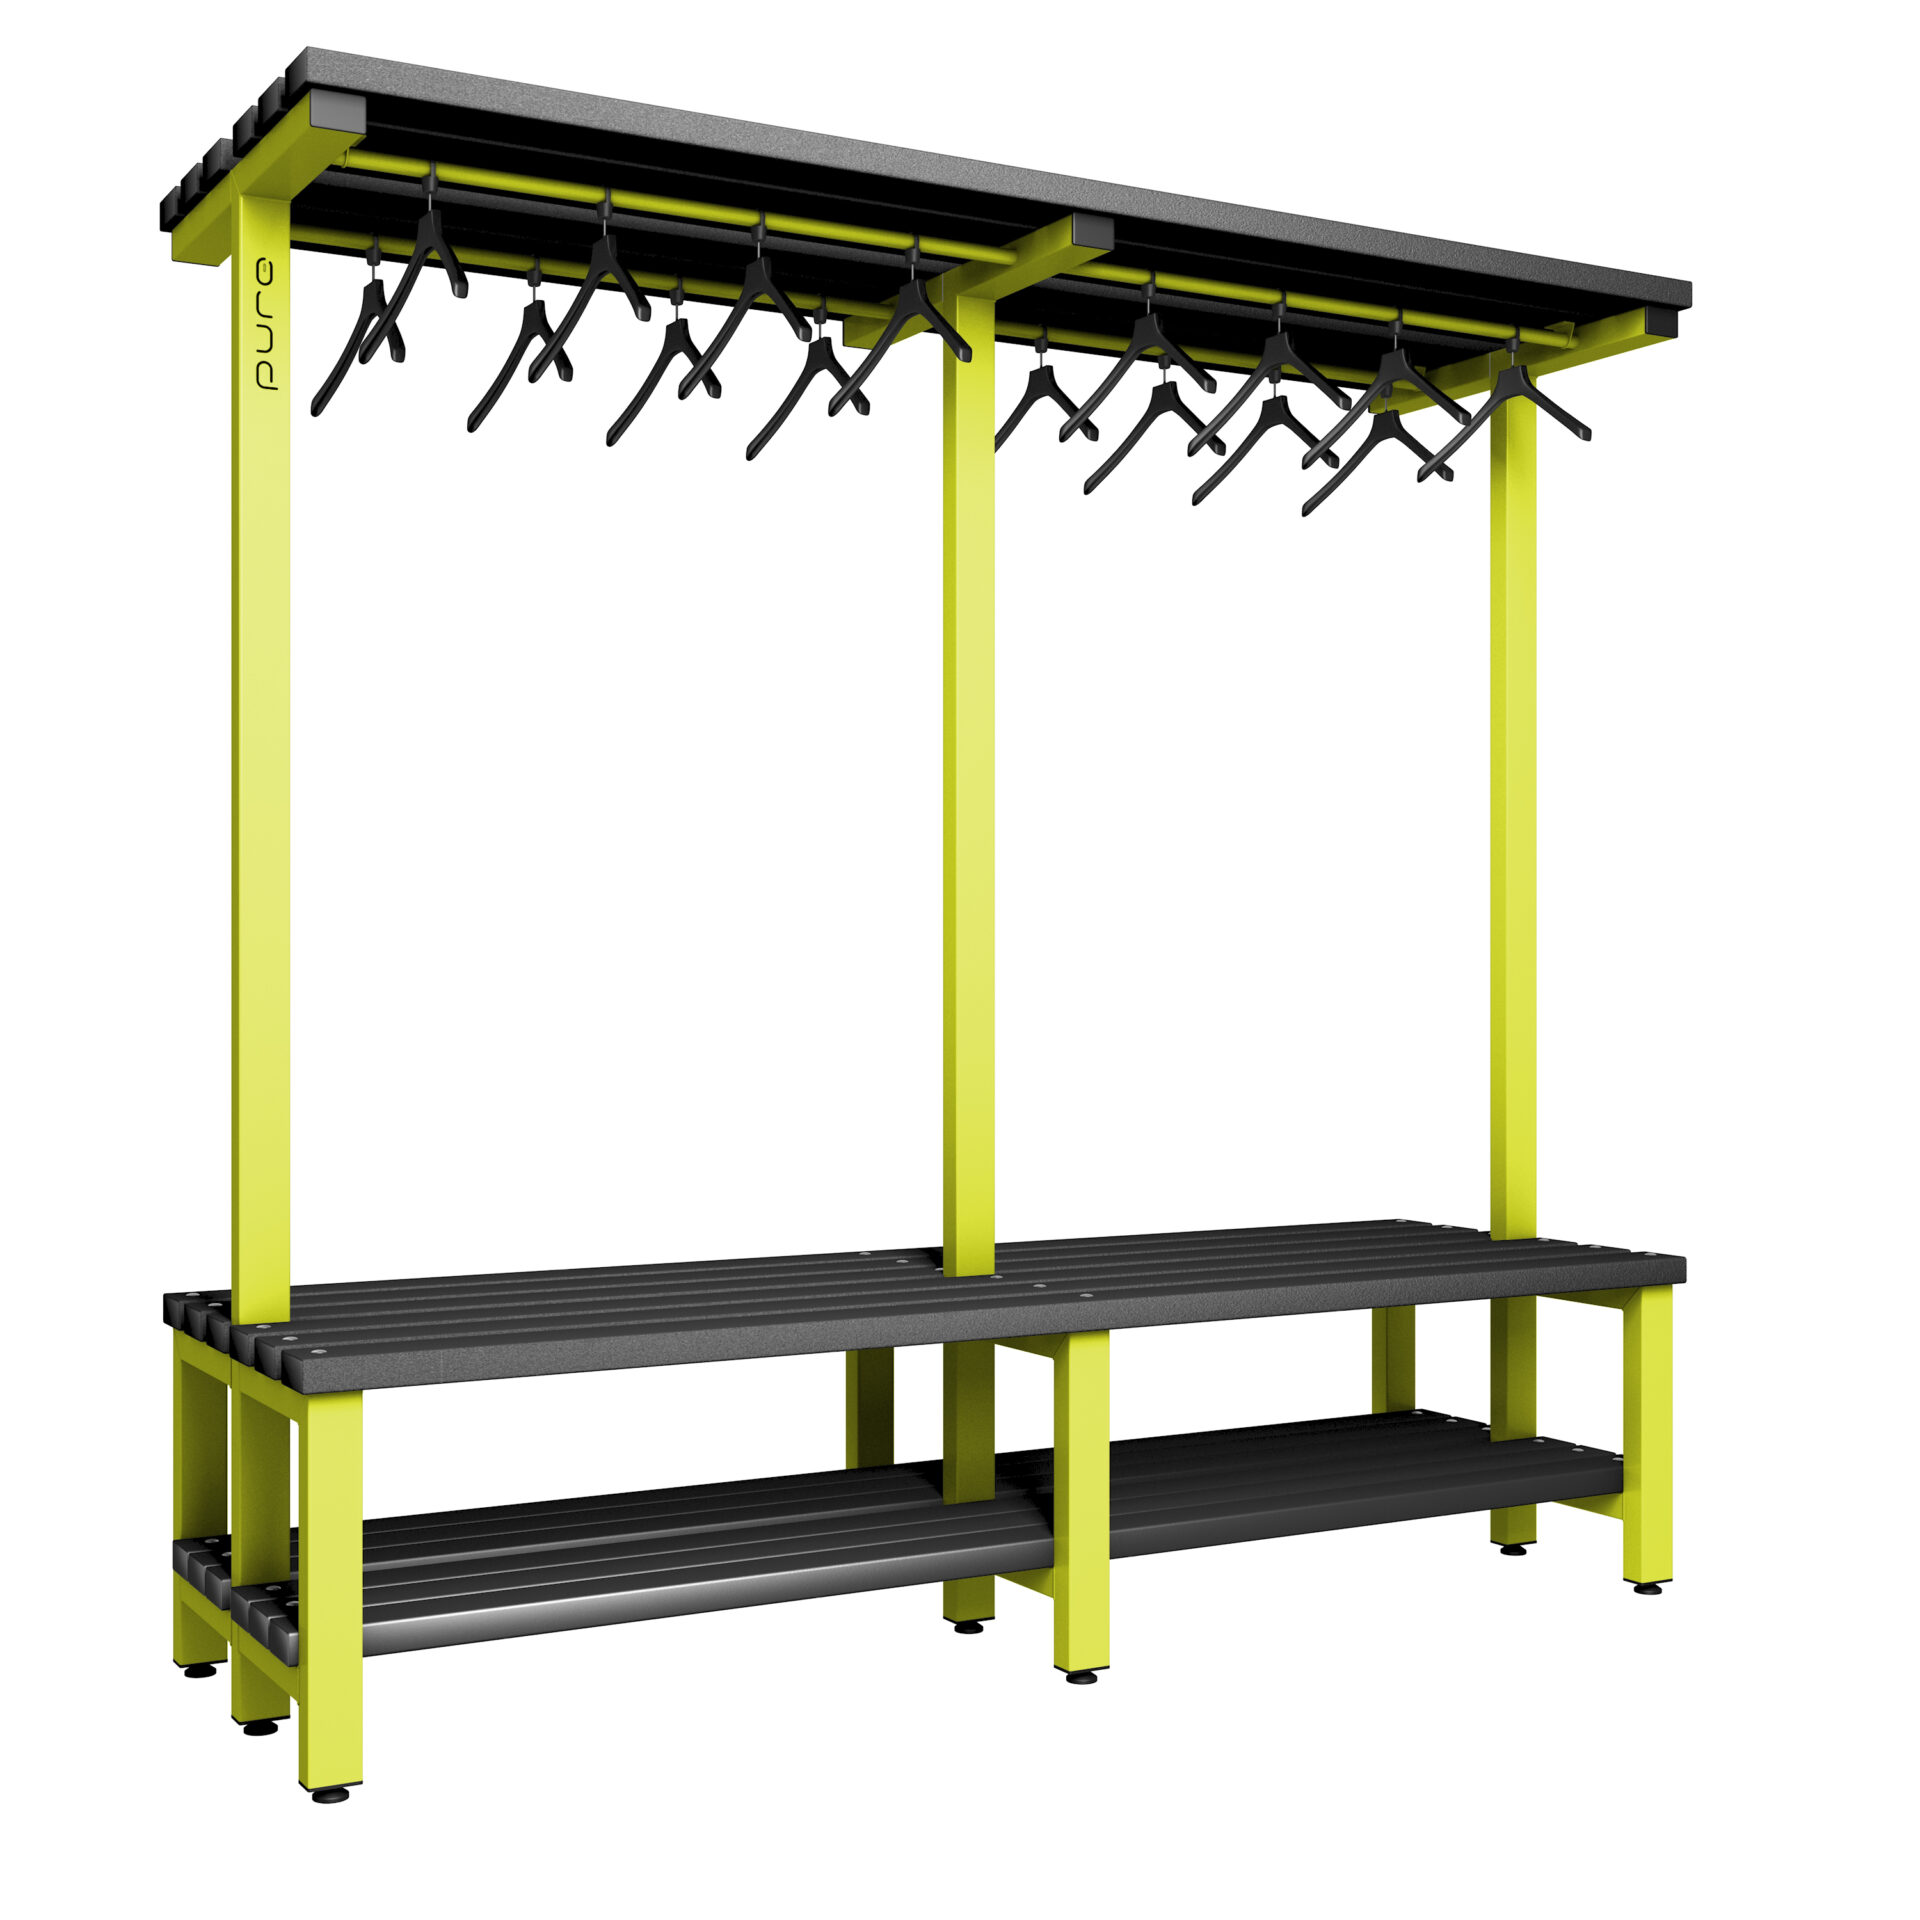 Pure Carbon Zero Double Sided 2000mm Overhead Hanging Bench With Shoe Shelf